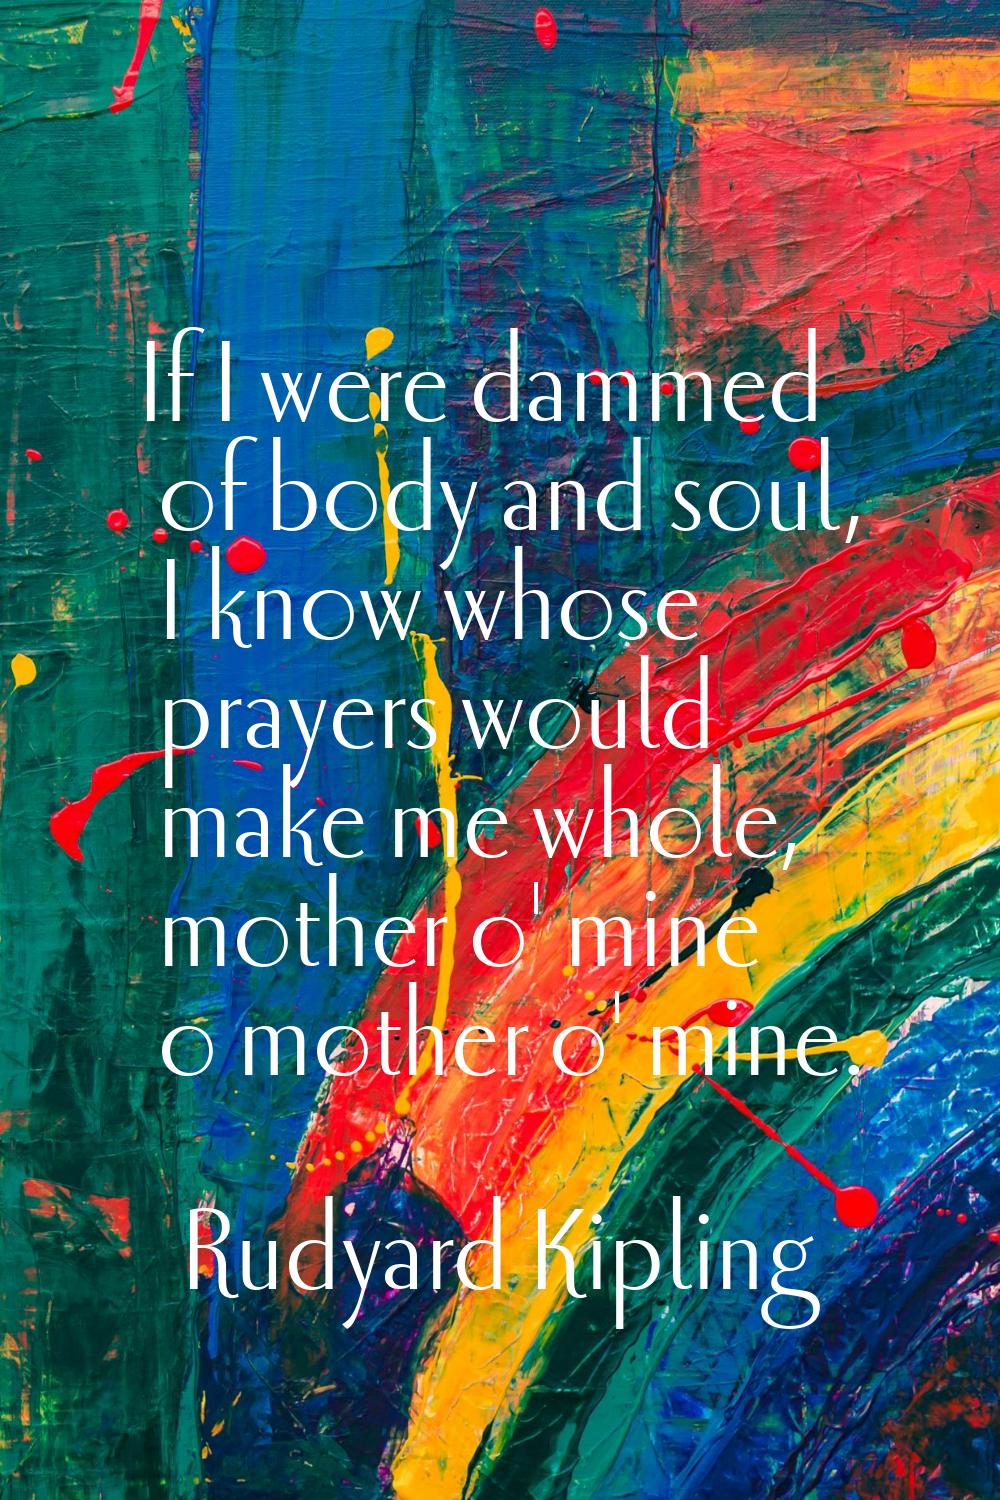 If I were dammed of body and soul, I know whose prayers would make me whole, mother o' mine o mothe